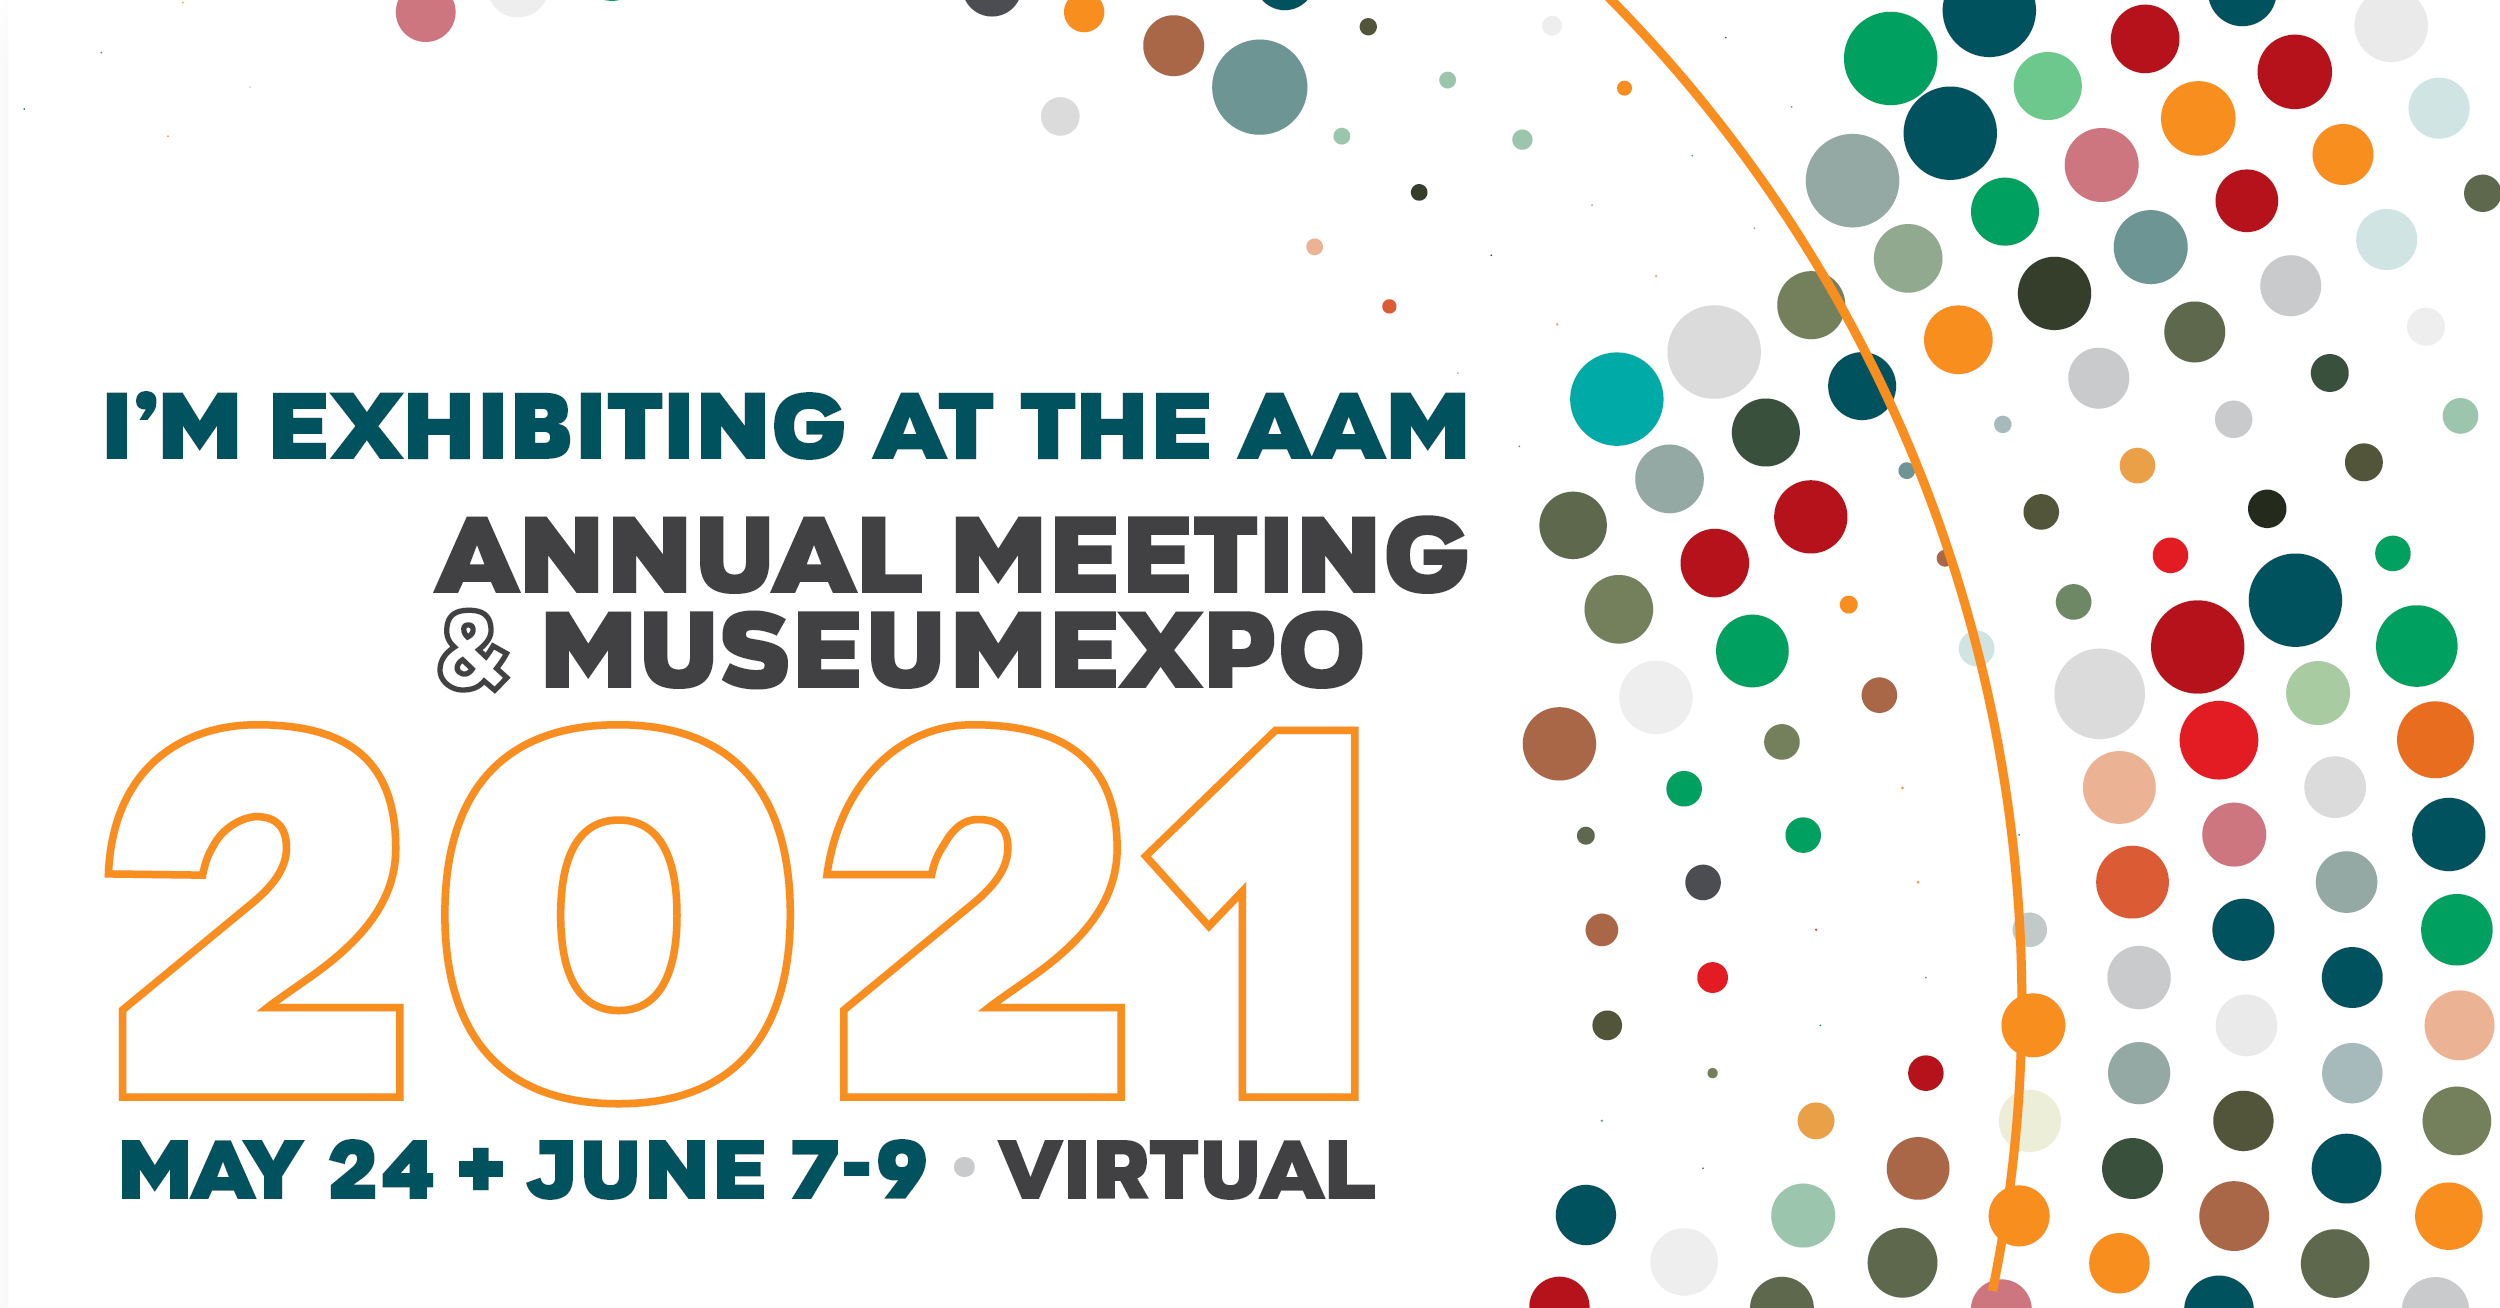 colorful graphic for exhibitors at the AAM Annual Meeting & Museum Expo 2021